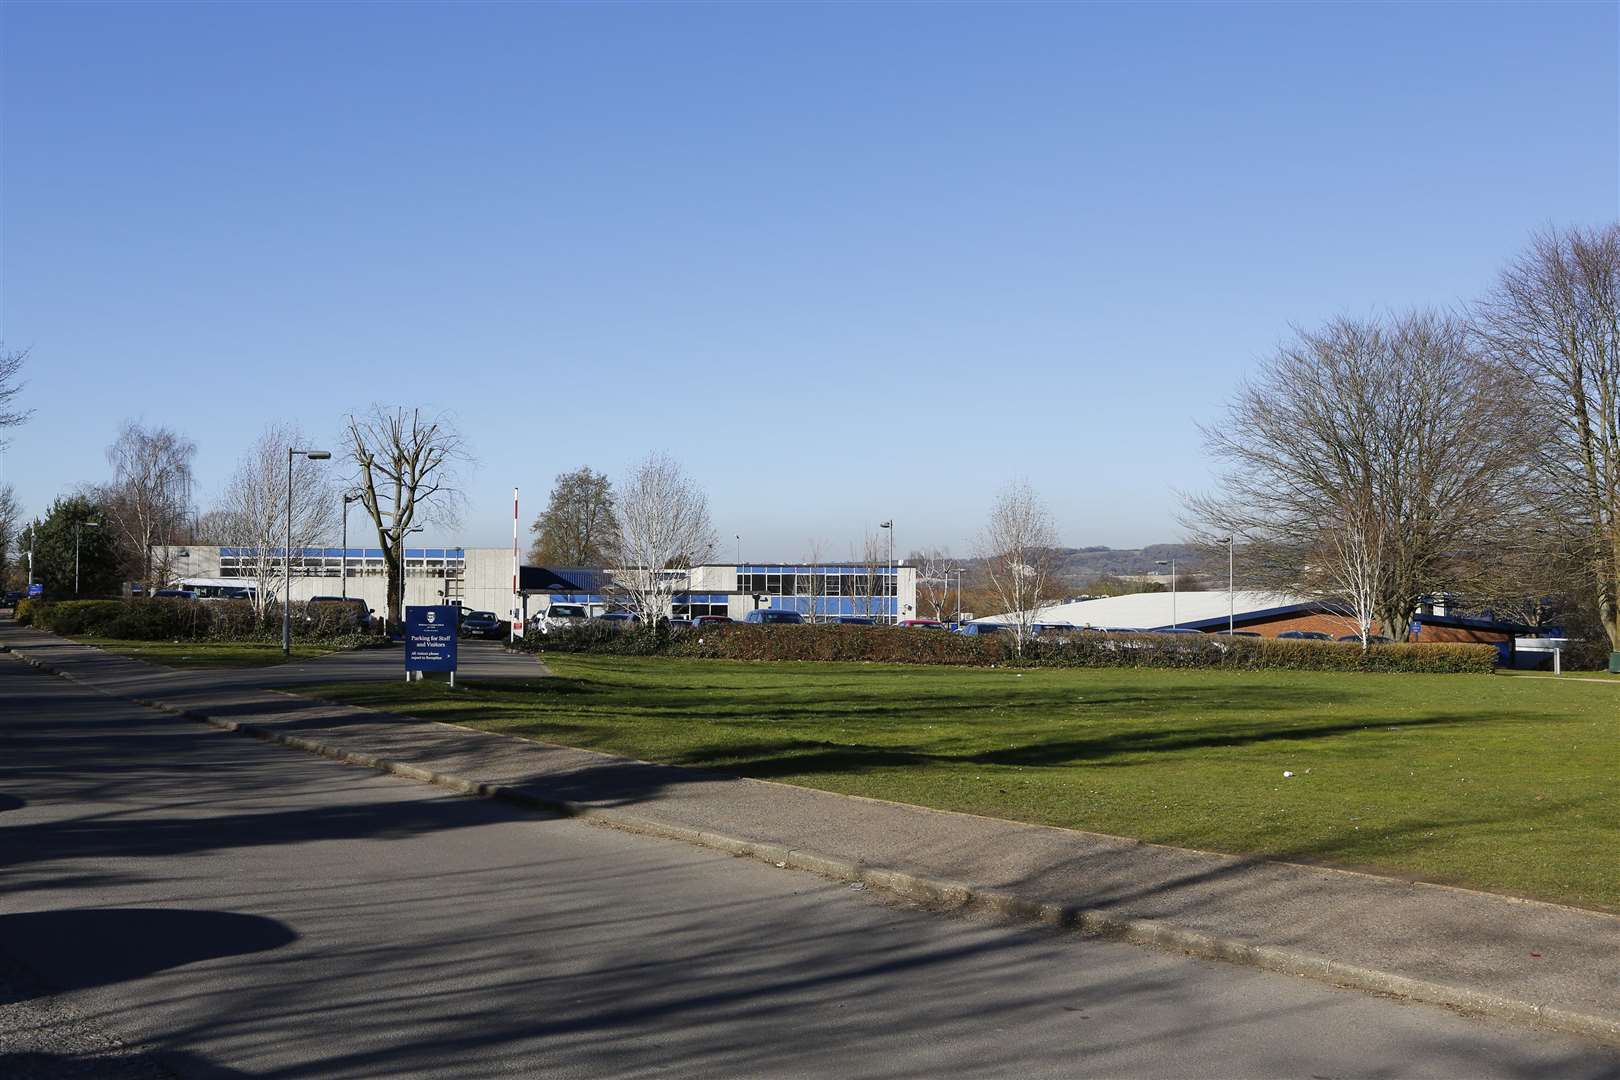 The existing school off Buckland Road, Maidstone